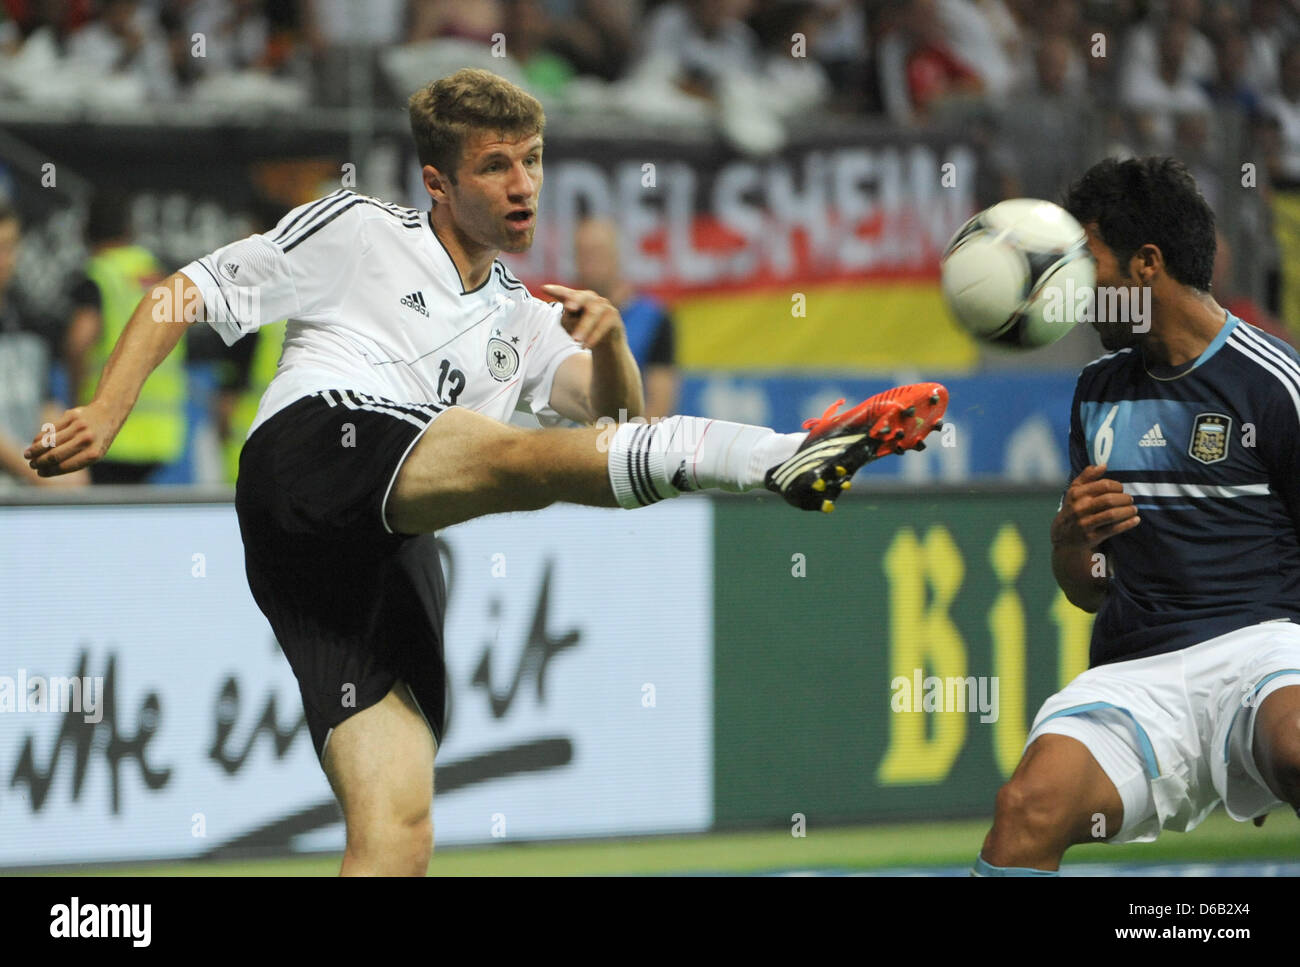 Germany's Thomas Mueller (l) vies for the ball with Argentina's Ezequiel Garay during their friendly soccer match at the Commerzbank-Arena in Frankfurt/ Main, Germany , 15 August 2012. Photo: Arne Dedert dpa/lhe  +++(c) dpa - Bildfunk+++ Stock Photo